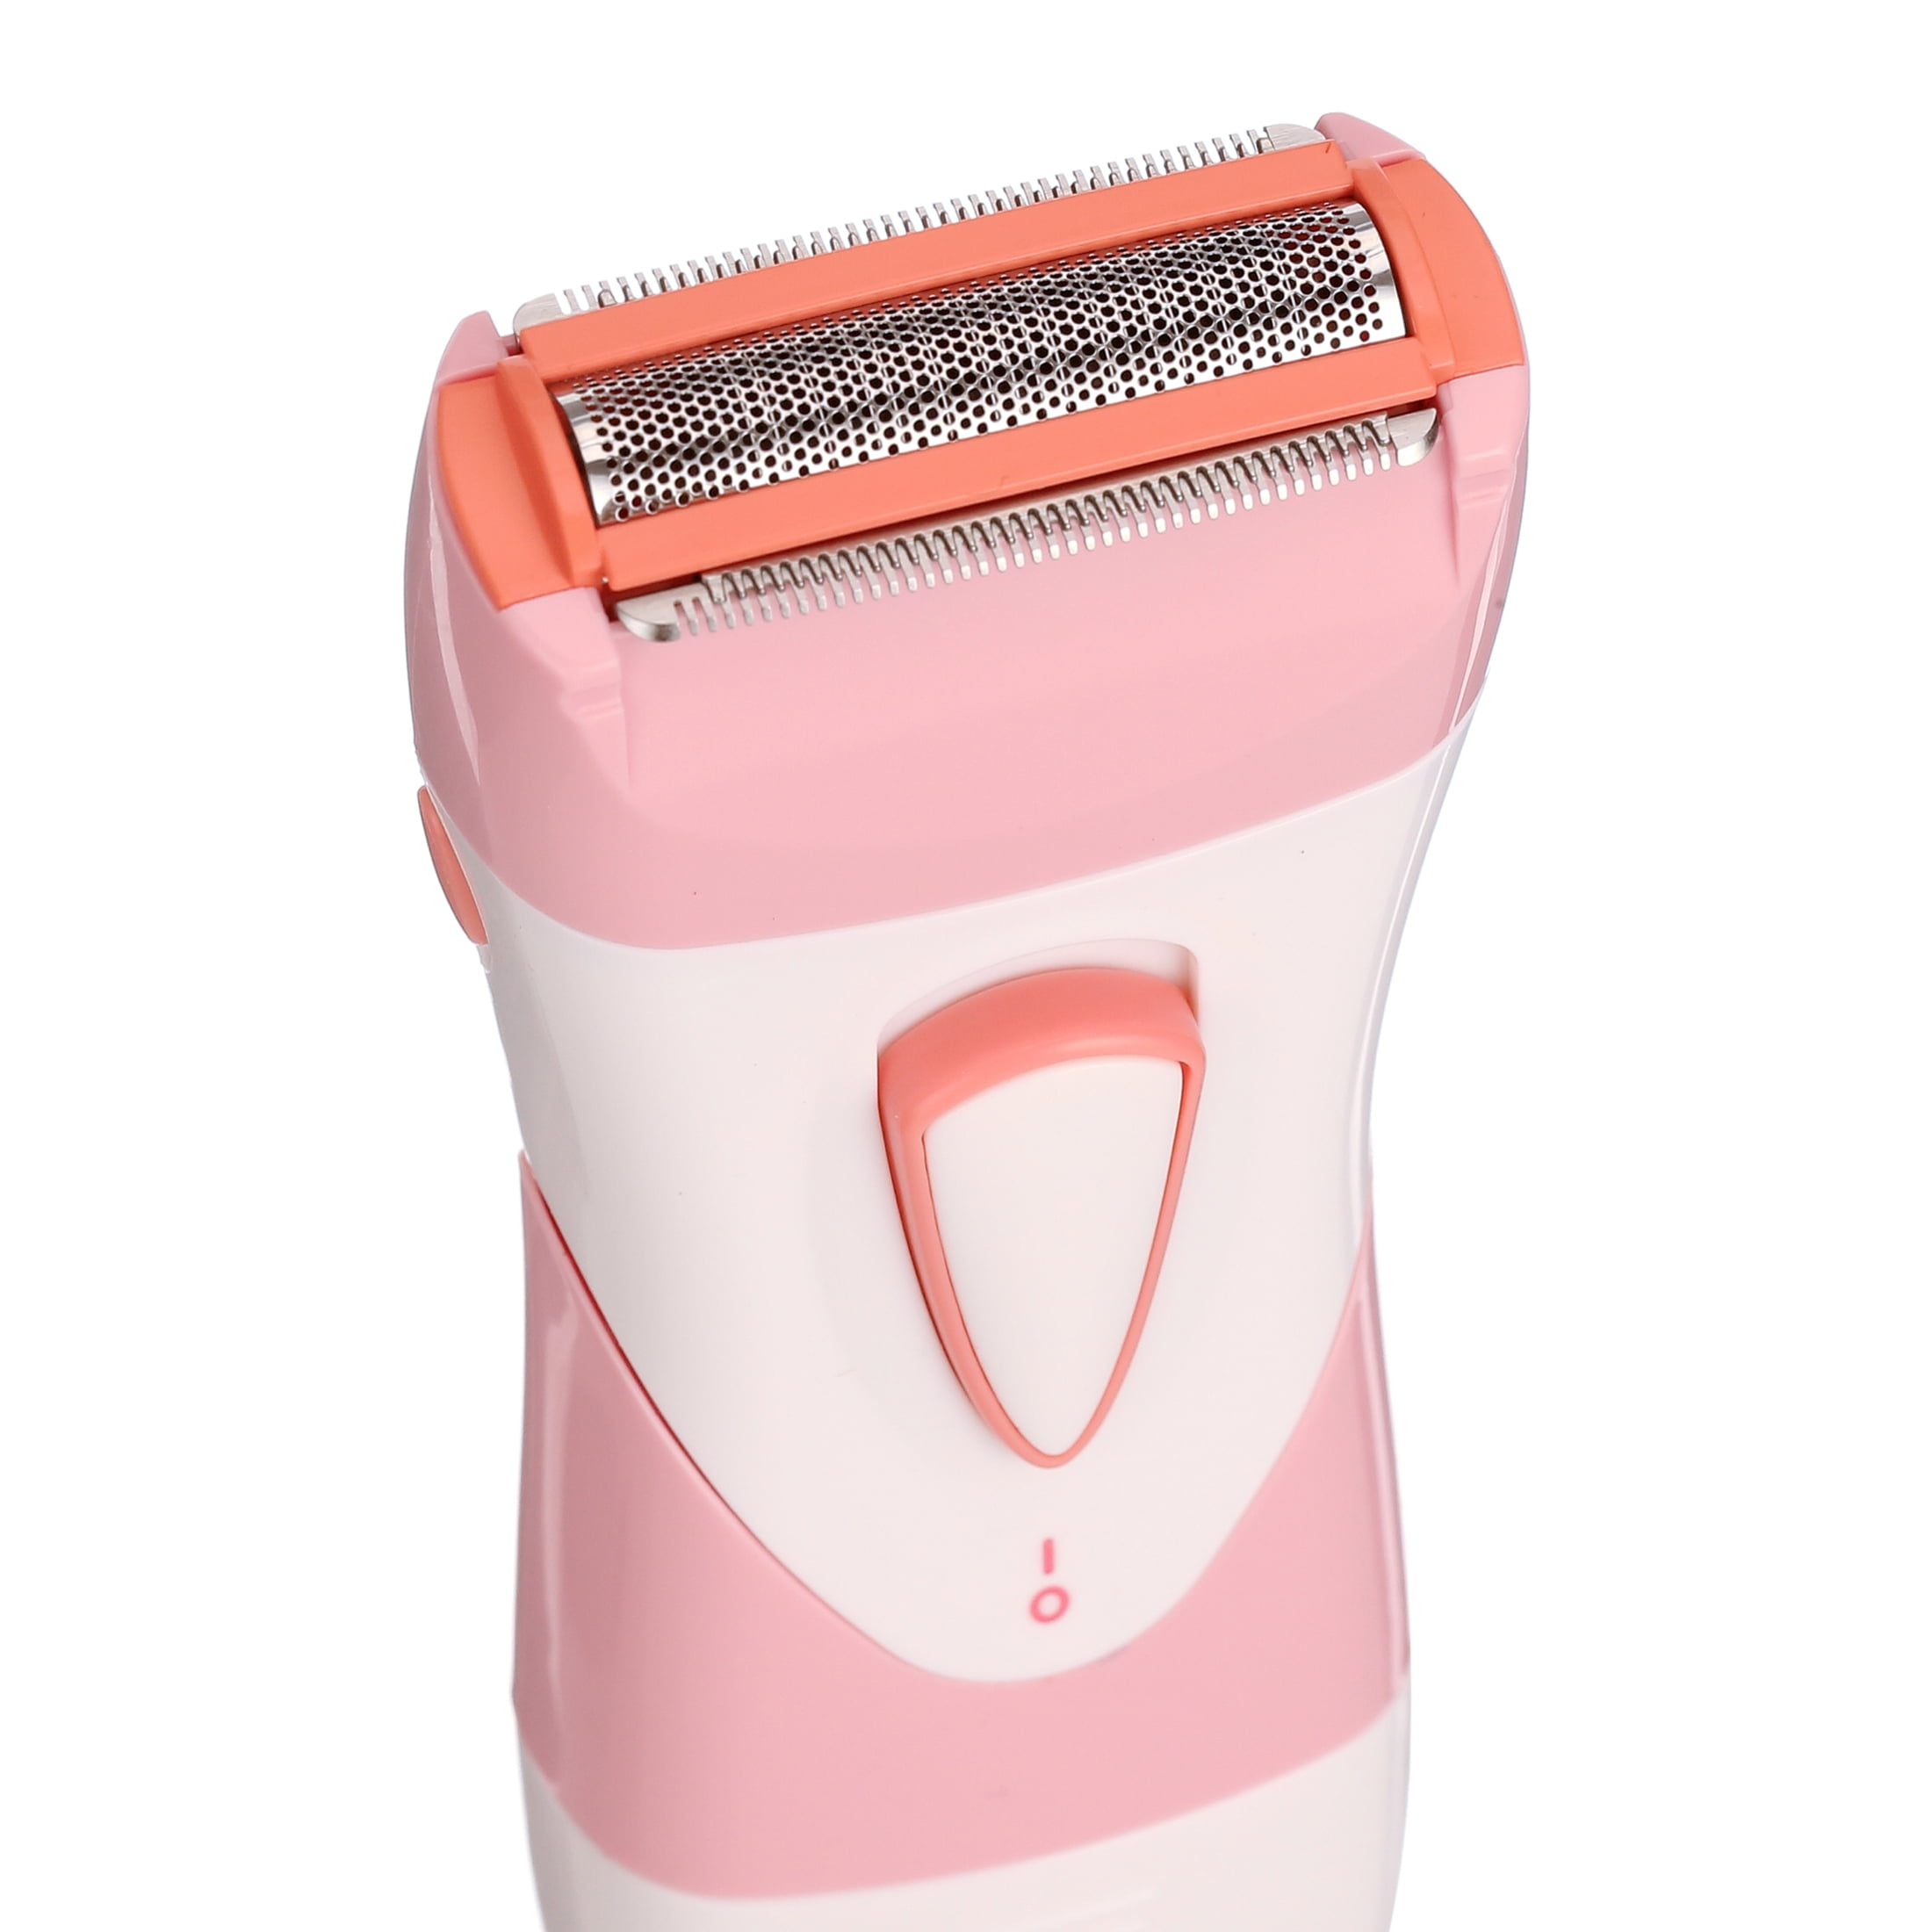 Philips SatinShave Essential for Women\'s Legs, Cordless Shaver Dry and Use (HP6306) Electric Wet